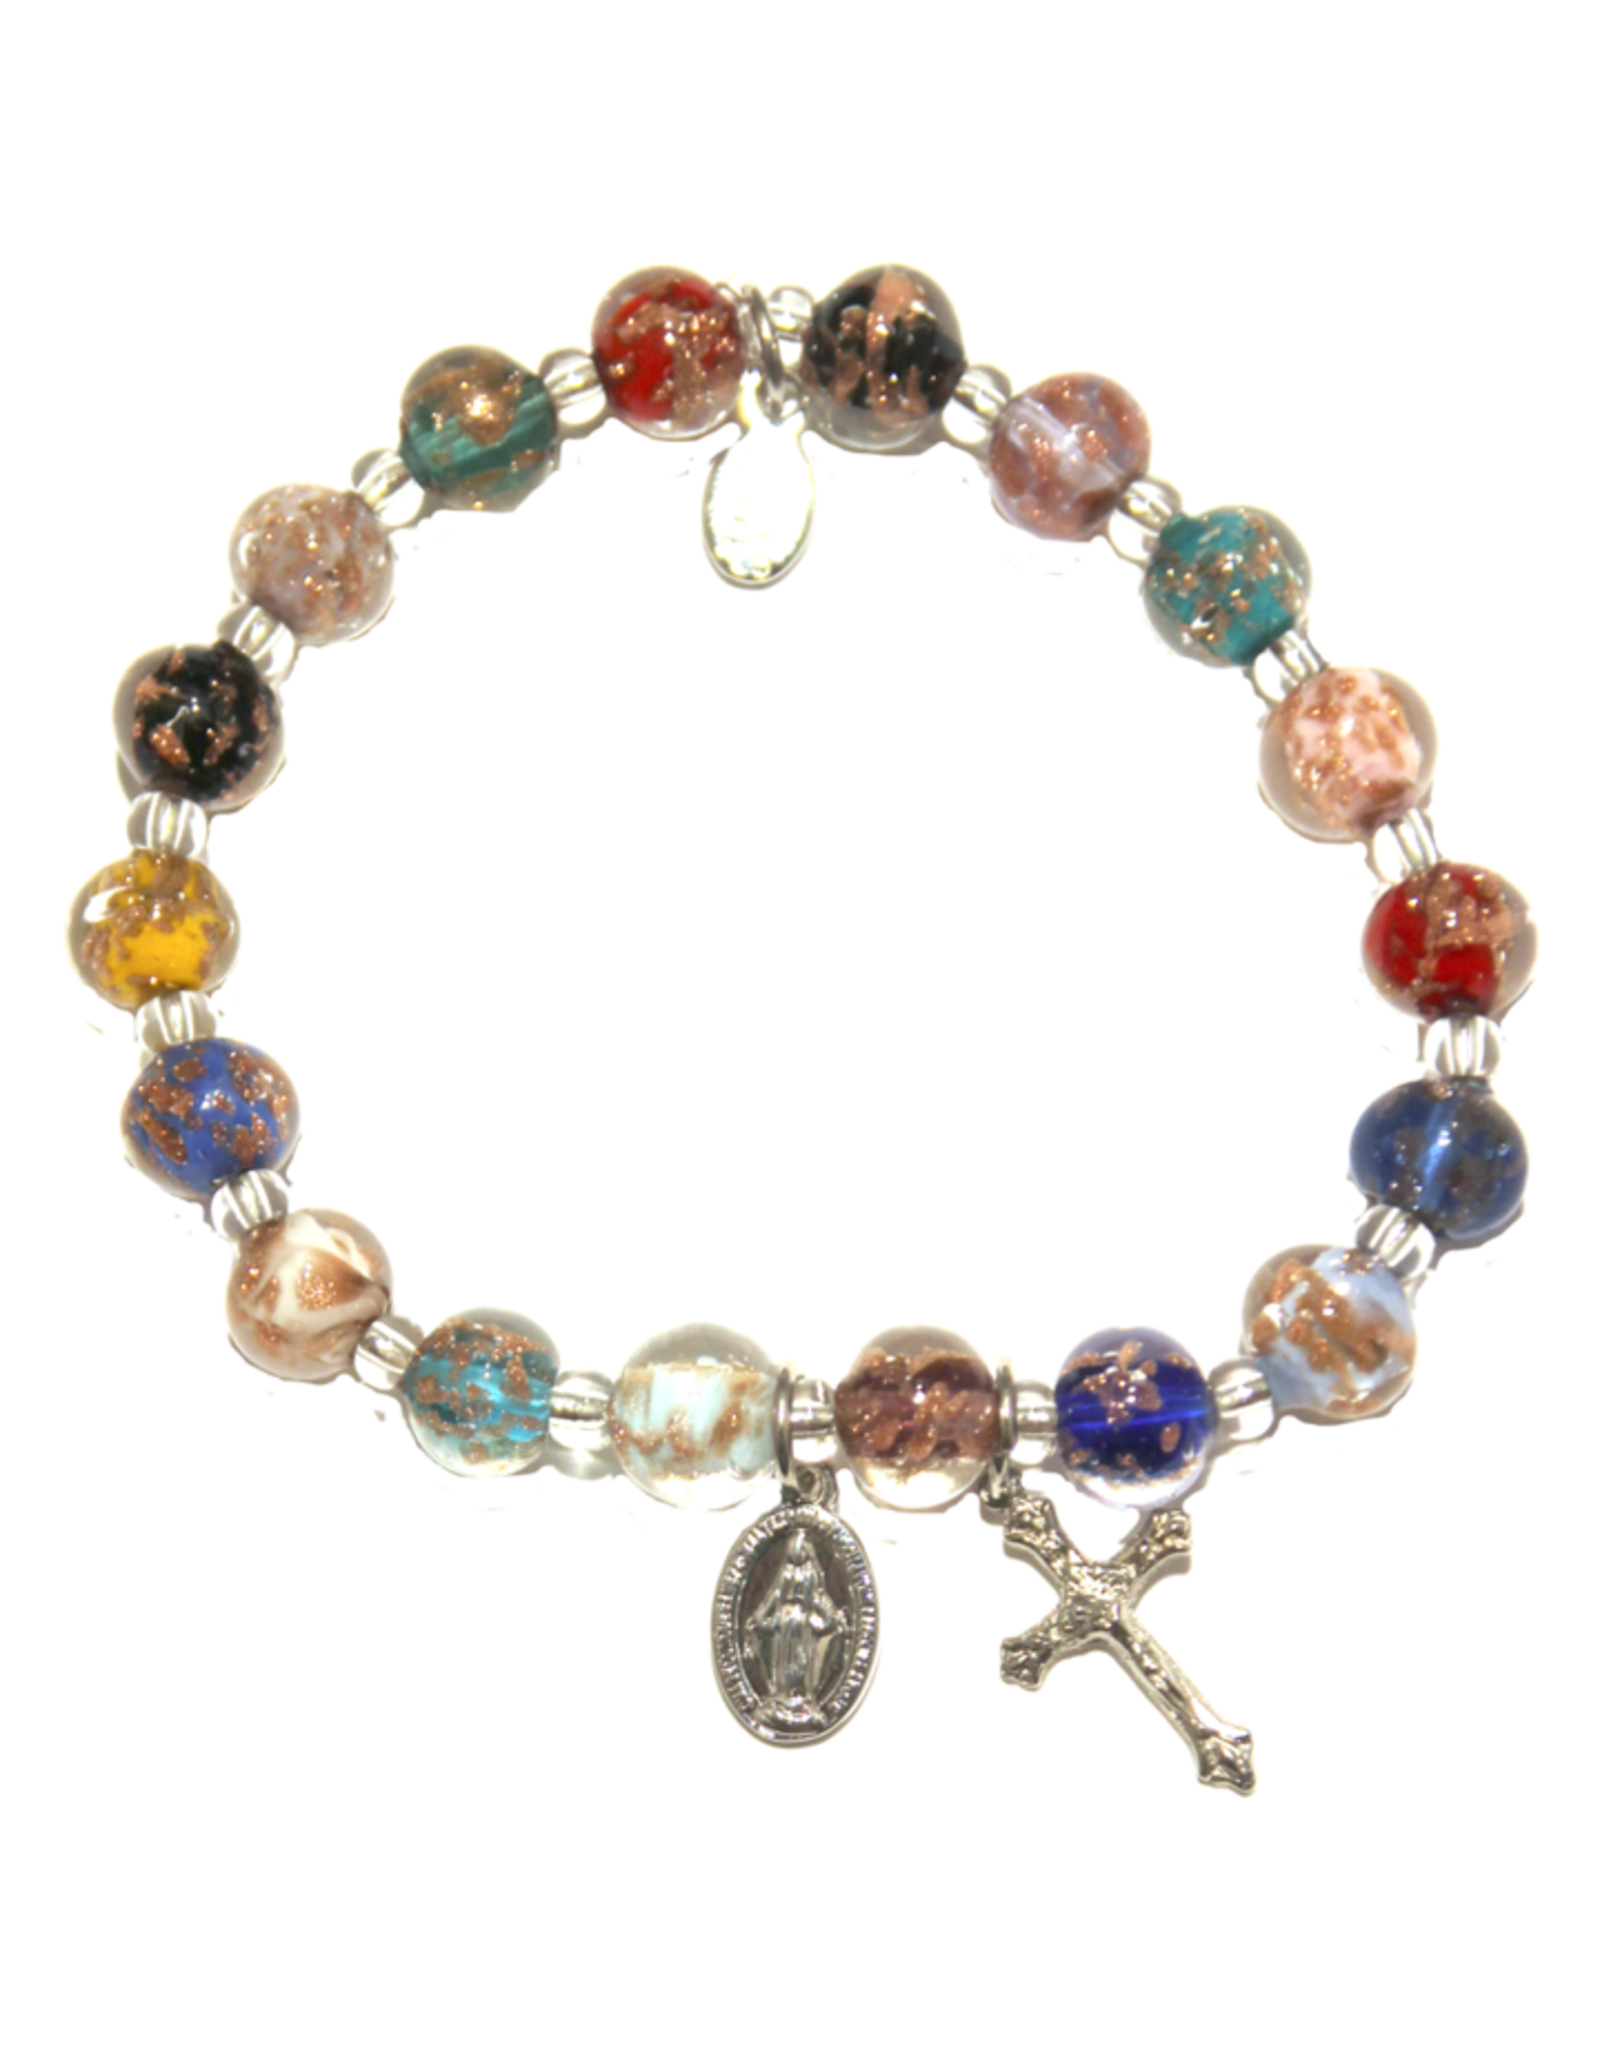 Tuscan Hills Bracelet - Multi Color Murano Glass with Handknotted Sommerso Beads & Crucifix